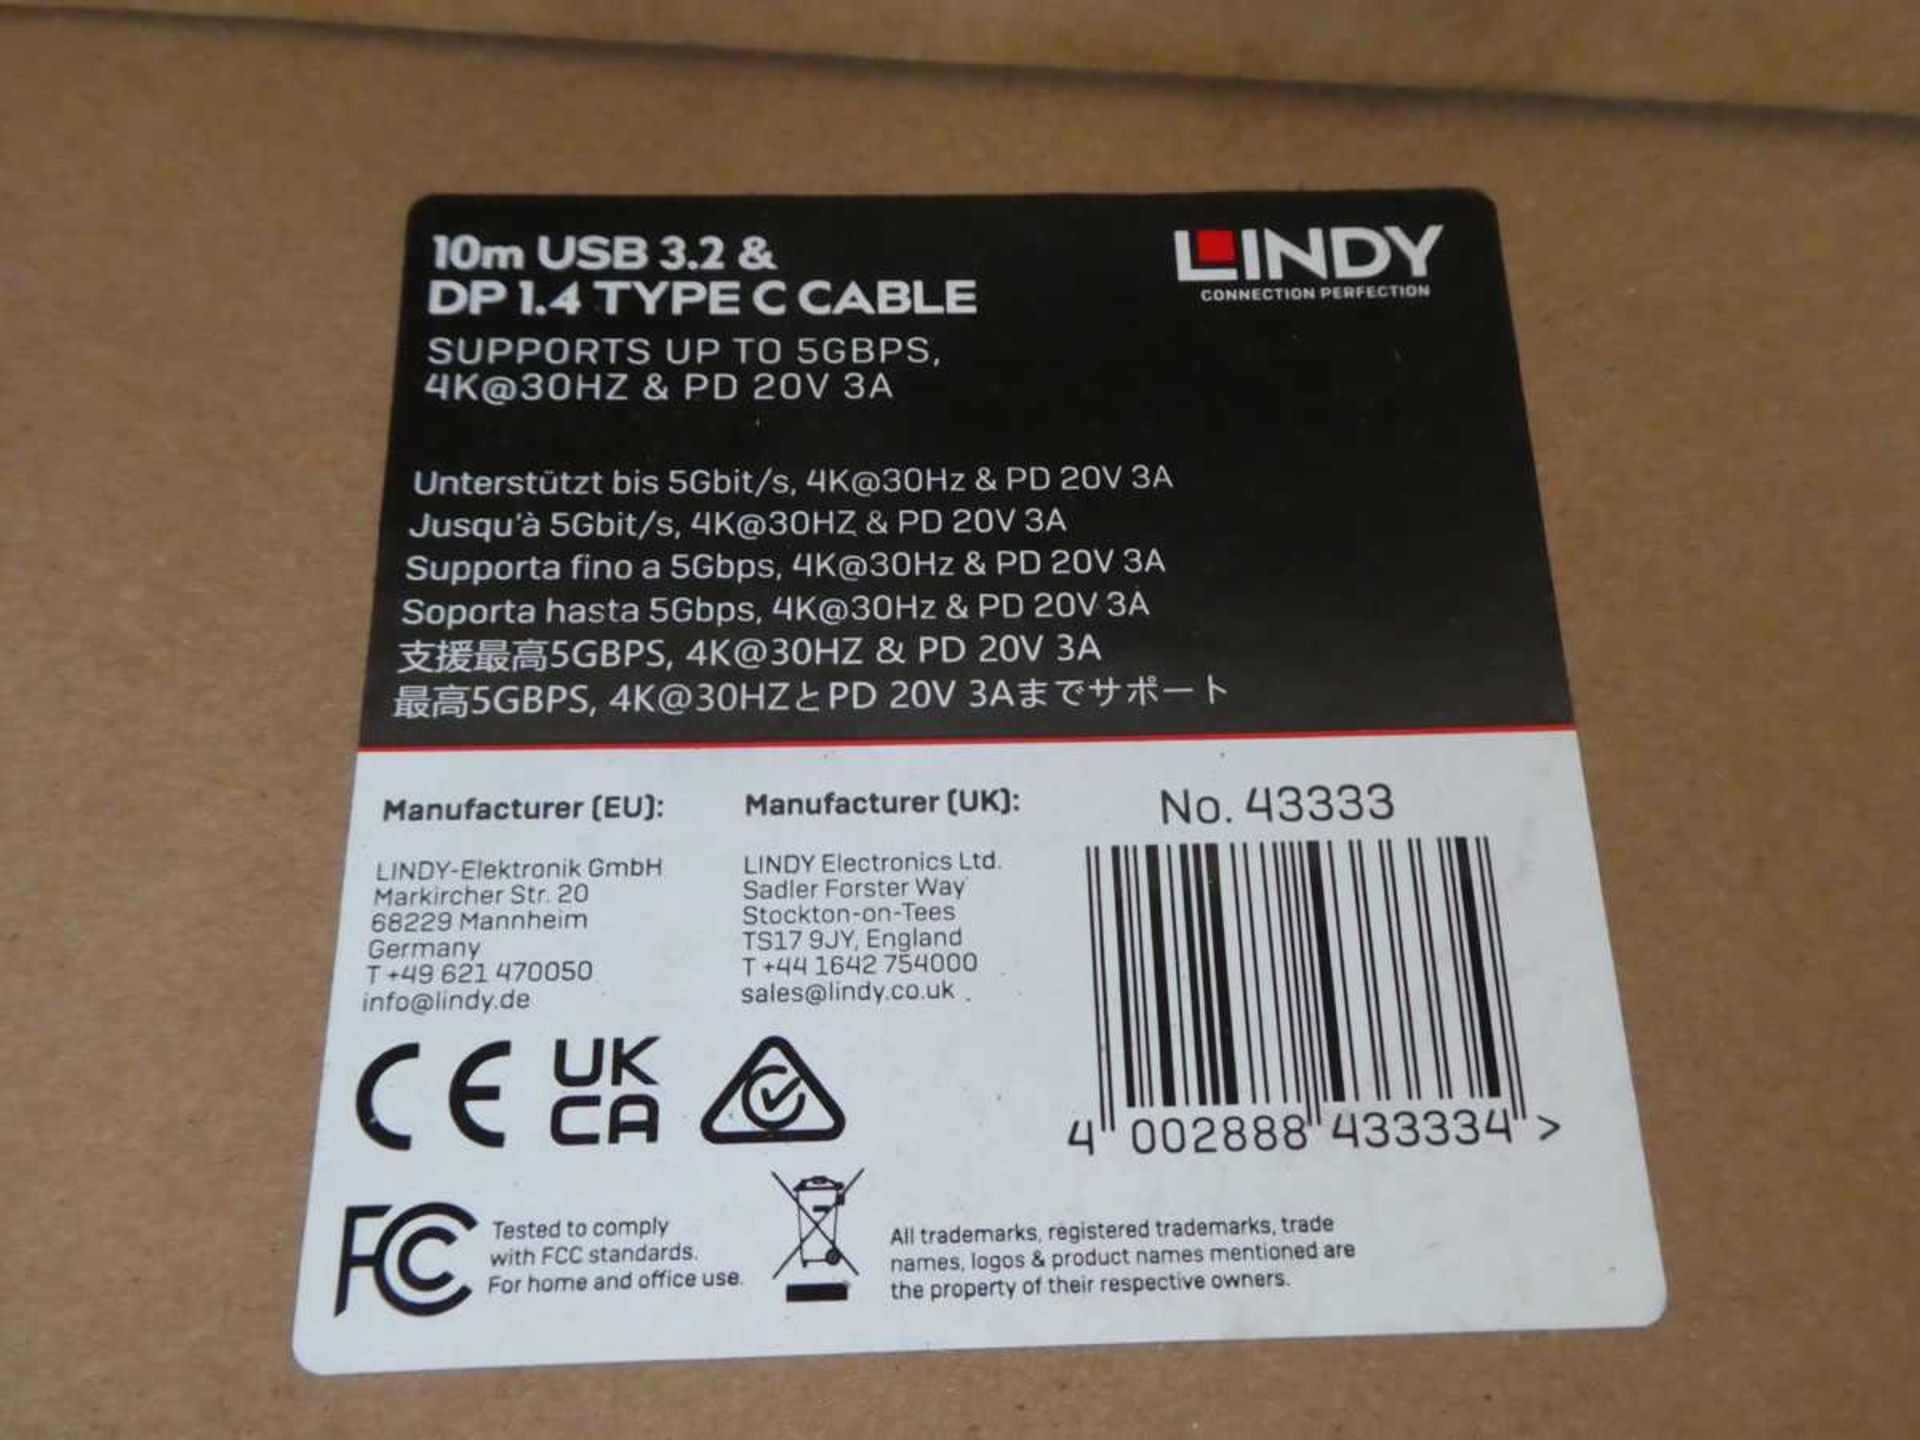 +VAT 2x Boxed Lindy cables, 1x USB 3.0 active optical cable 30m, and 1x 10m USB 3.2 and DP 1.4 - Image 2 of 3